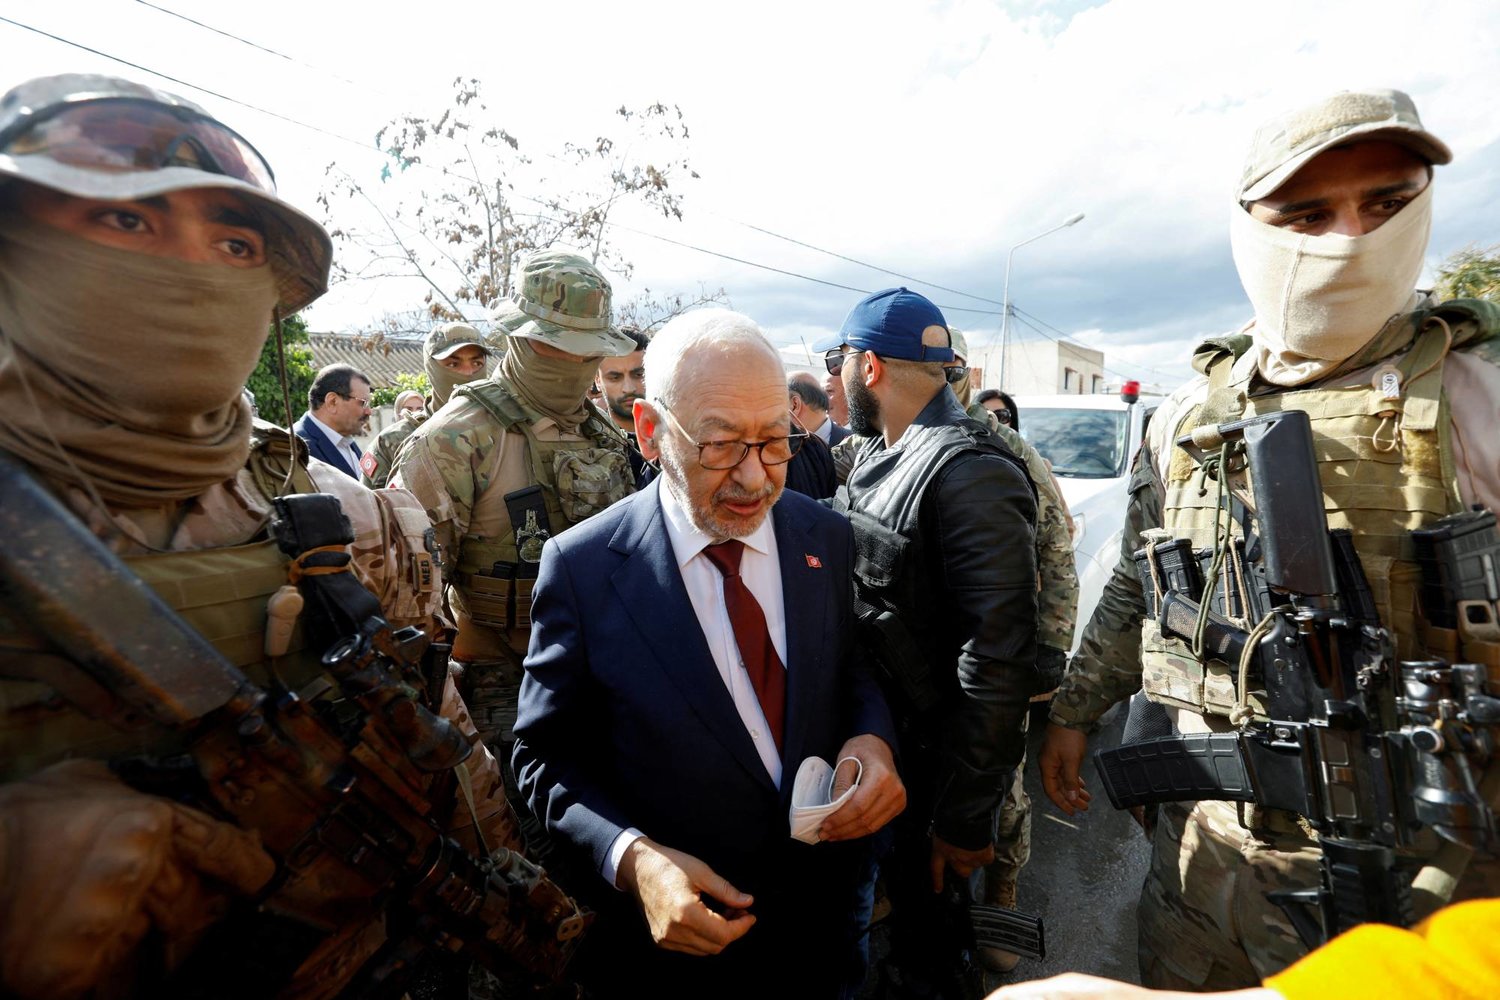 FILE PHOTO: Tunisia's Rached Ghannouchi is surrounded by presidential guard members upon his arrival for questioning after he was summoned by Tunisian anti-terrorism police in Tunis, Tunisia April 1, 2022. REUTERS/Zoubeir Souissi/File Photo